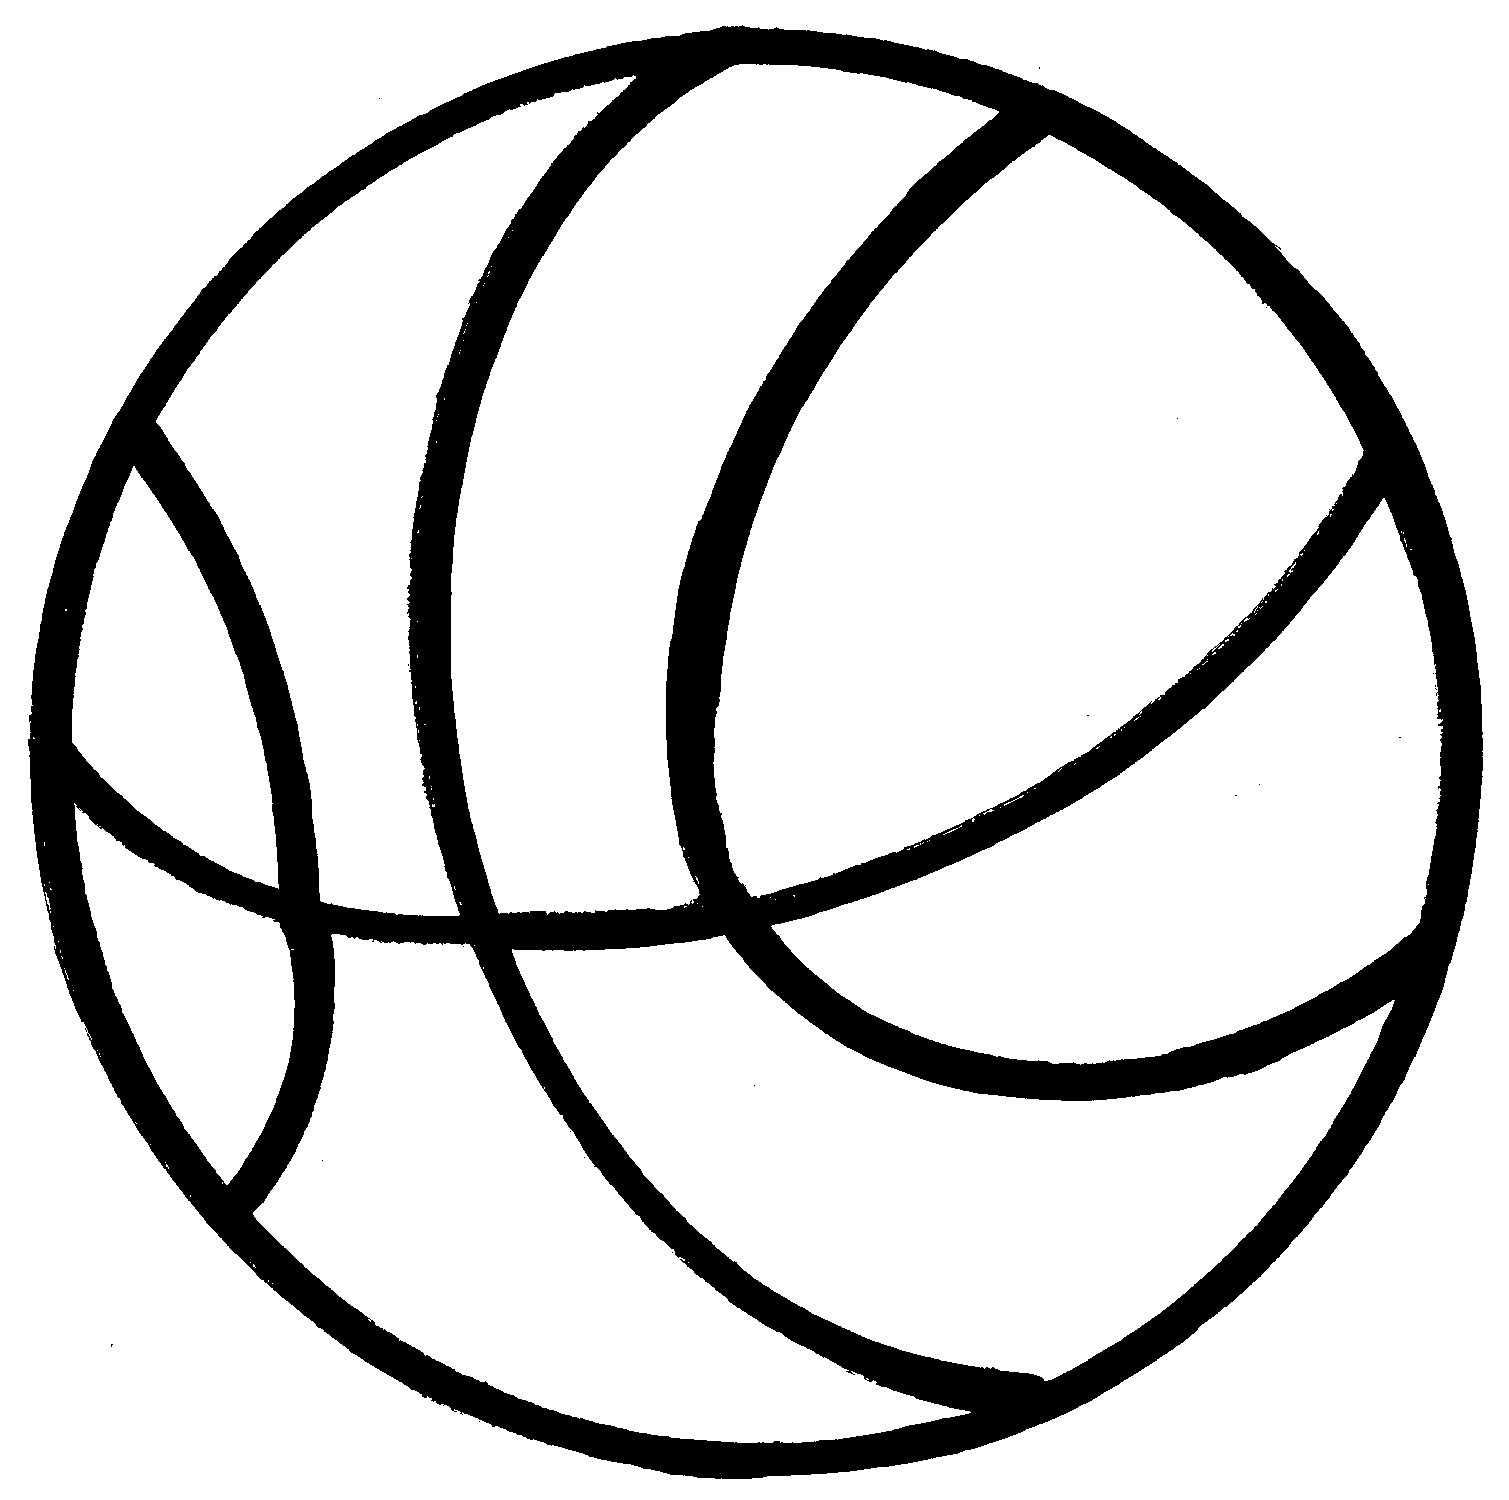 Basketball Ball Black And White Images - Clipart library